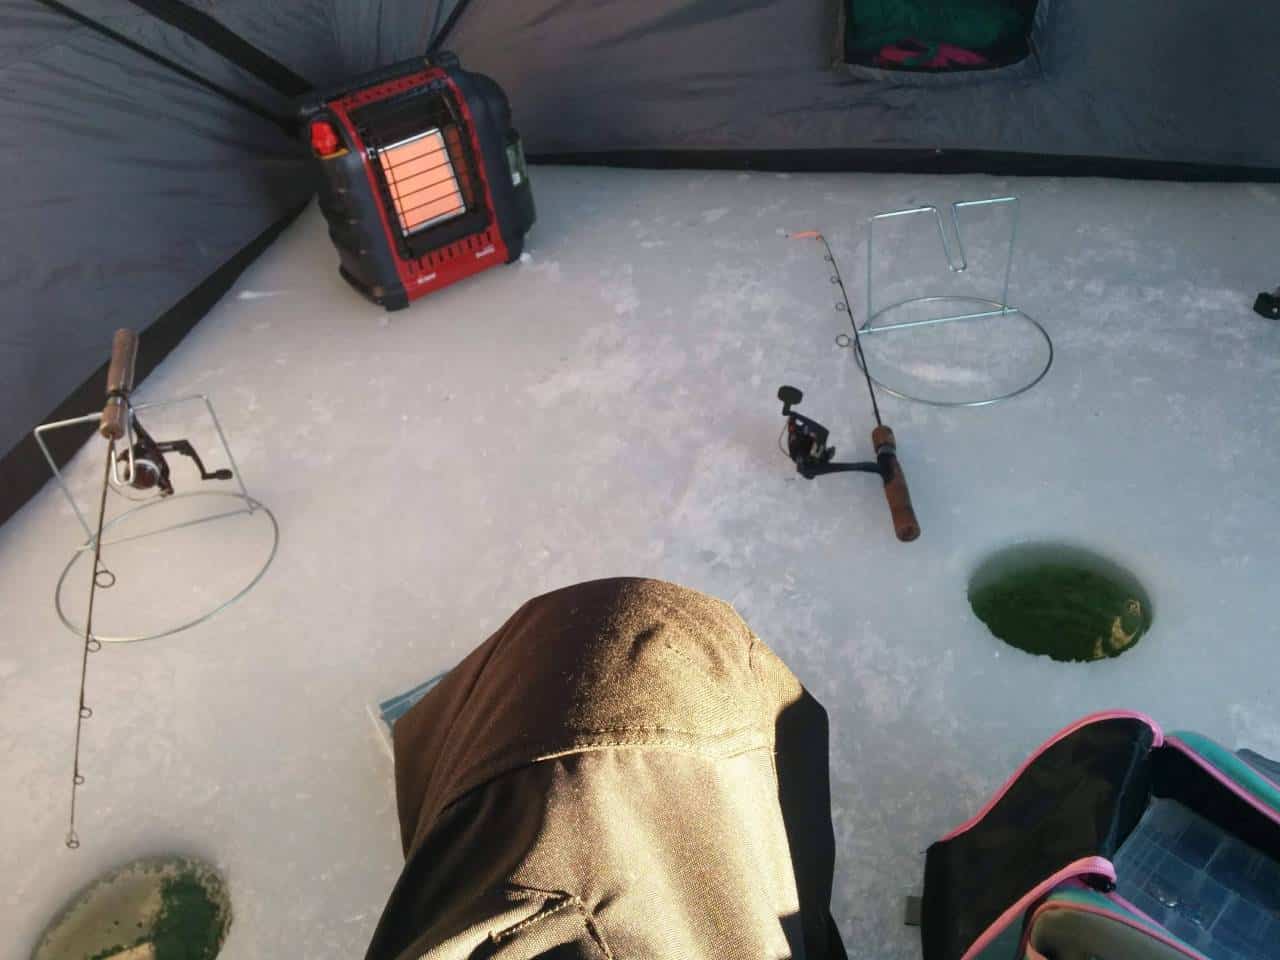 Hard water season - Ice fishing is one of my favourite things to do. I'll travel pretty far to find the good spots. 